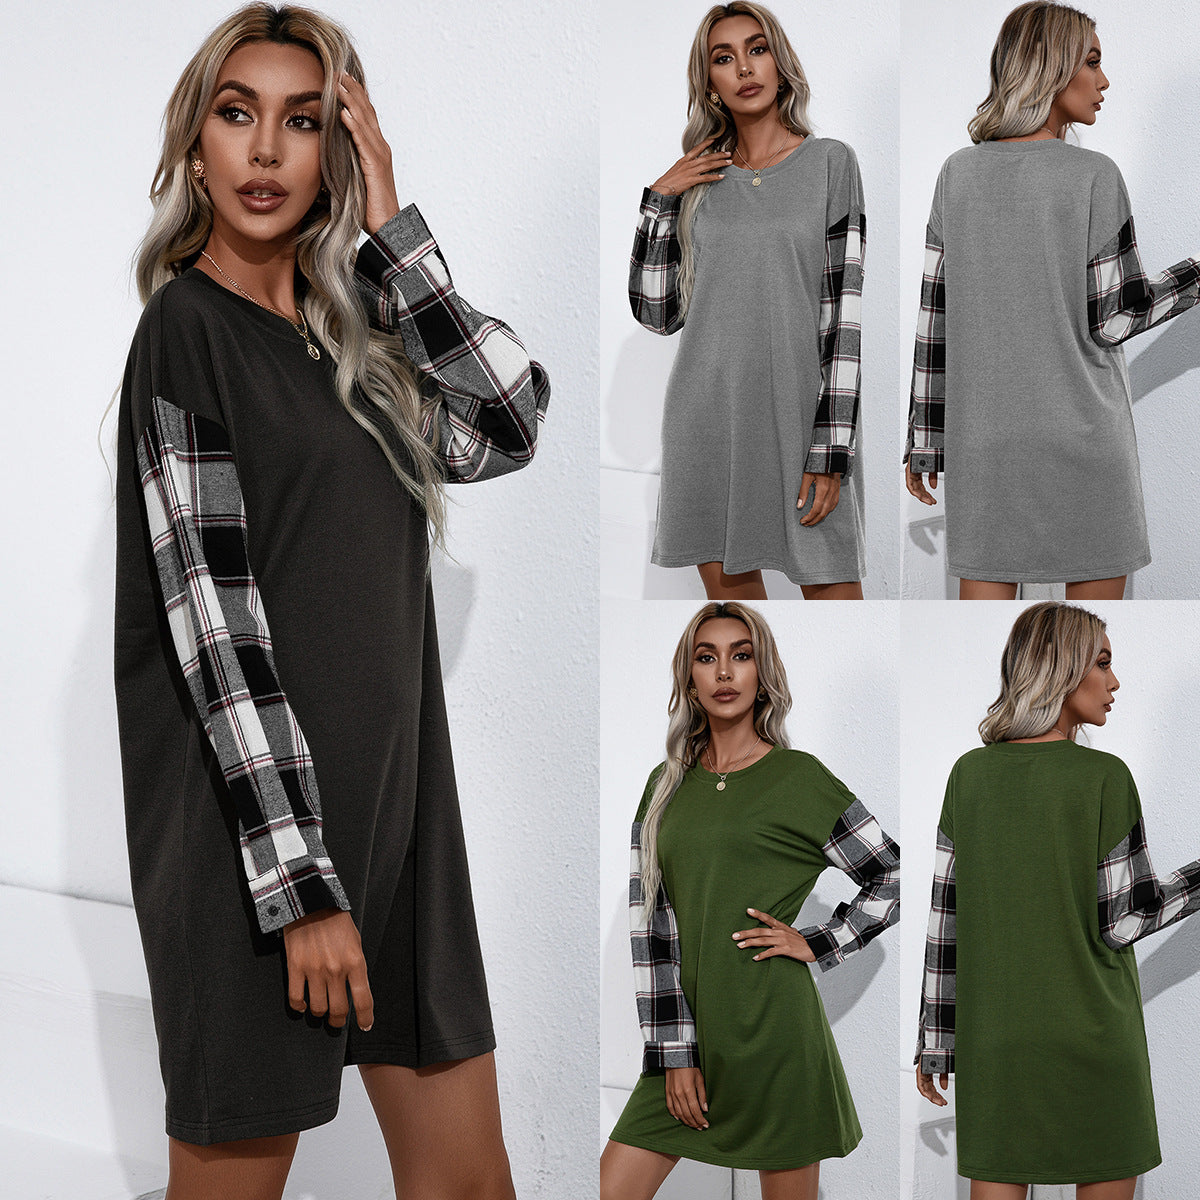 Plaid Stitching Casual Round Neck Long-sleeved T-dress Women